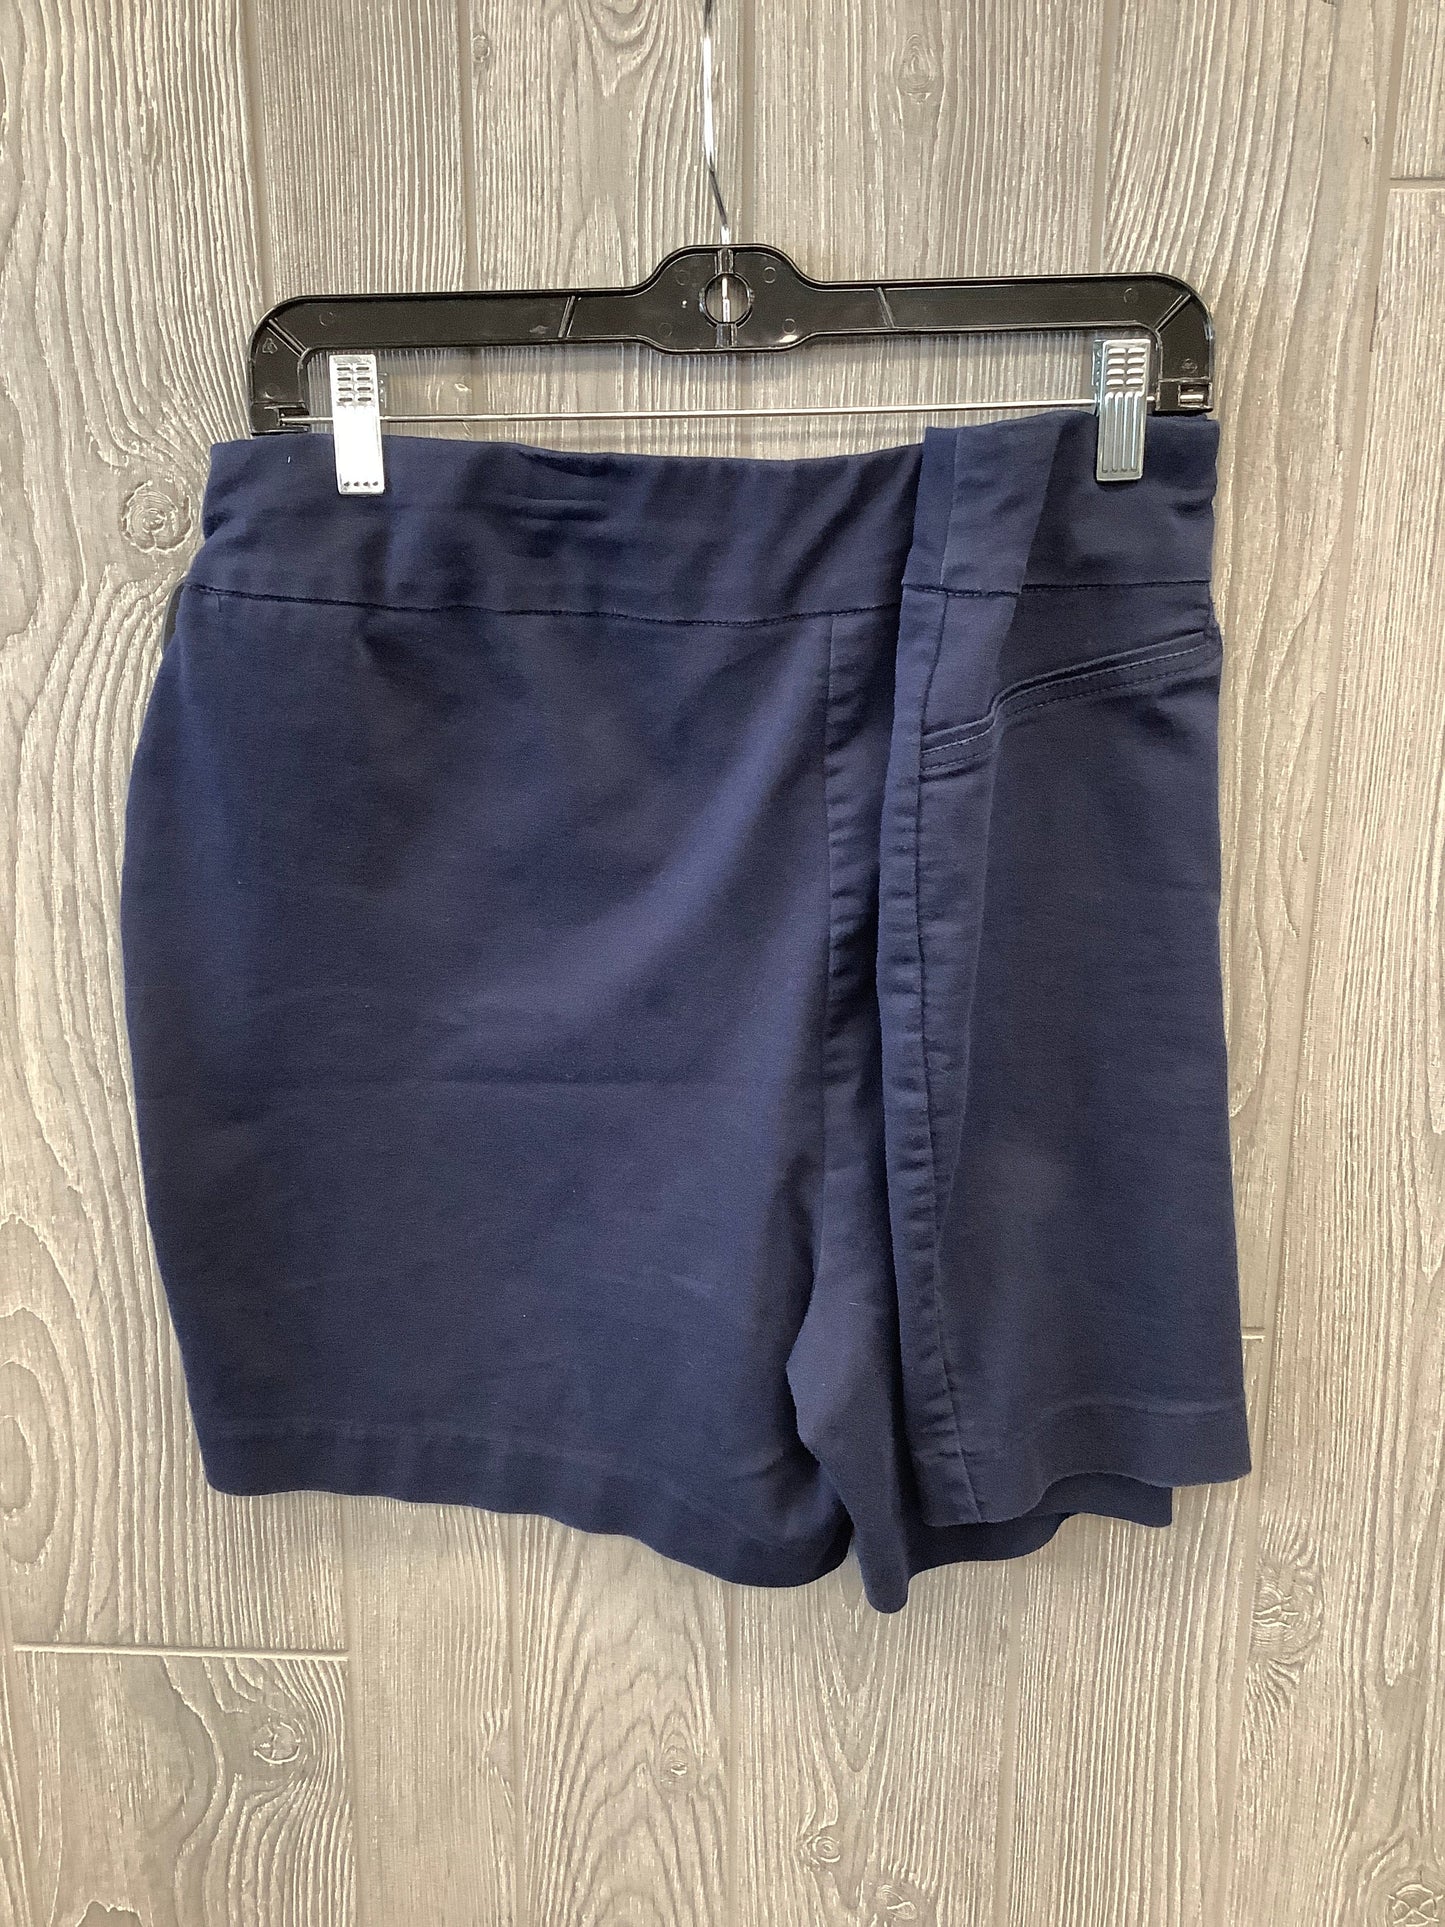 Shorts By Croft And Barrow  Size: 16